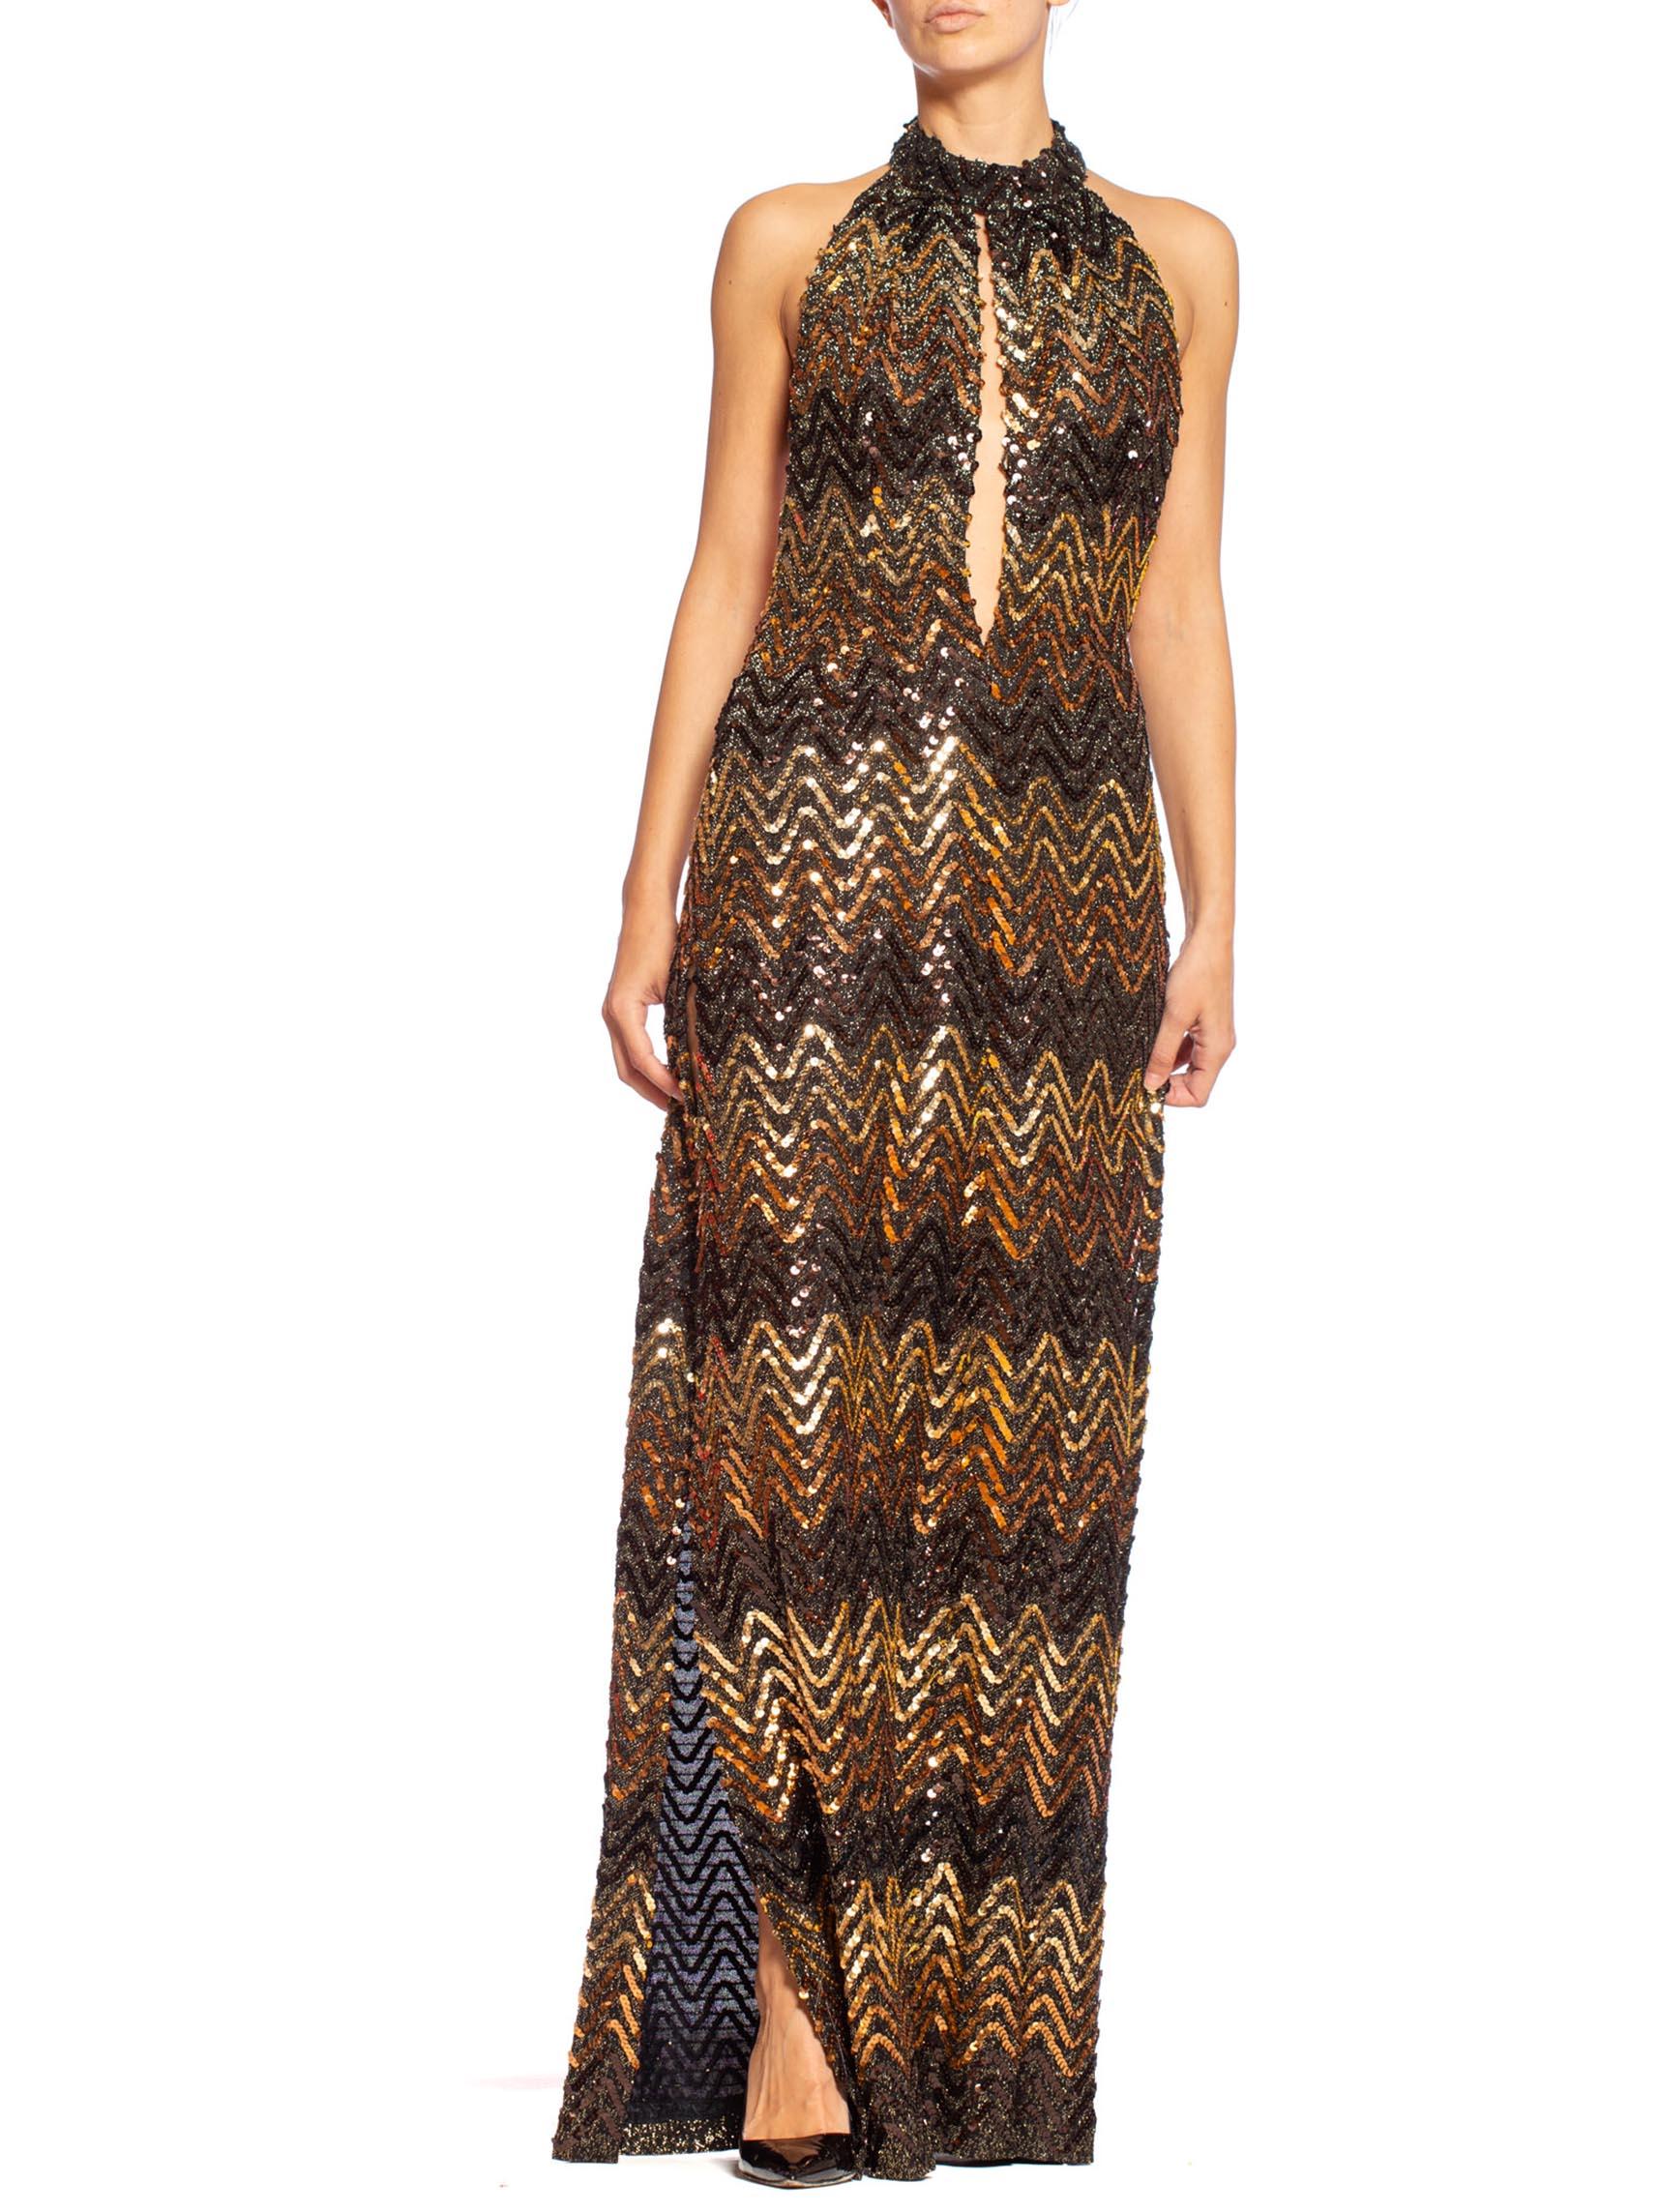 MORPHEW COLLECTION Copper & Gold Backless Disco Gown With Slit Made From 1970S Sequin Fabric
MORPHEW COLLECTION is made entirely by hand in our NYC Ateliér of rare antique materials sourced from around the globe. Our sustainable vintage materials